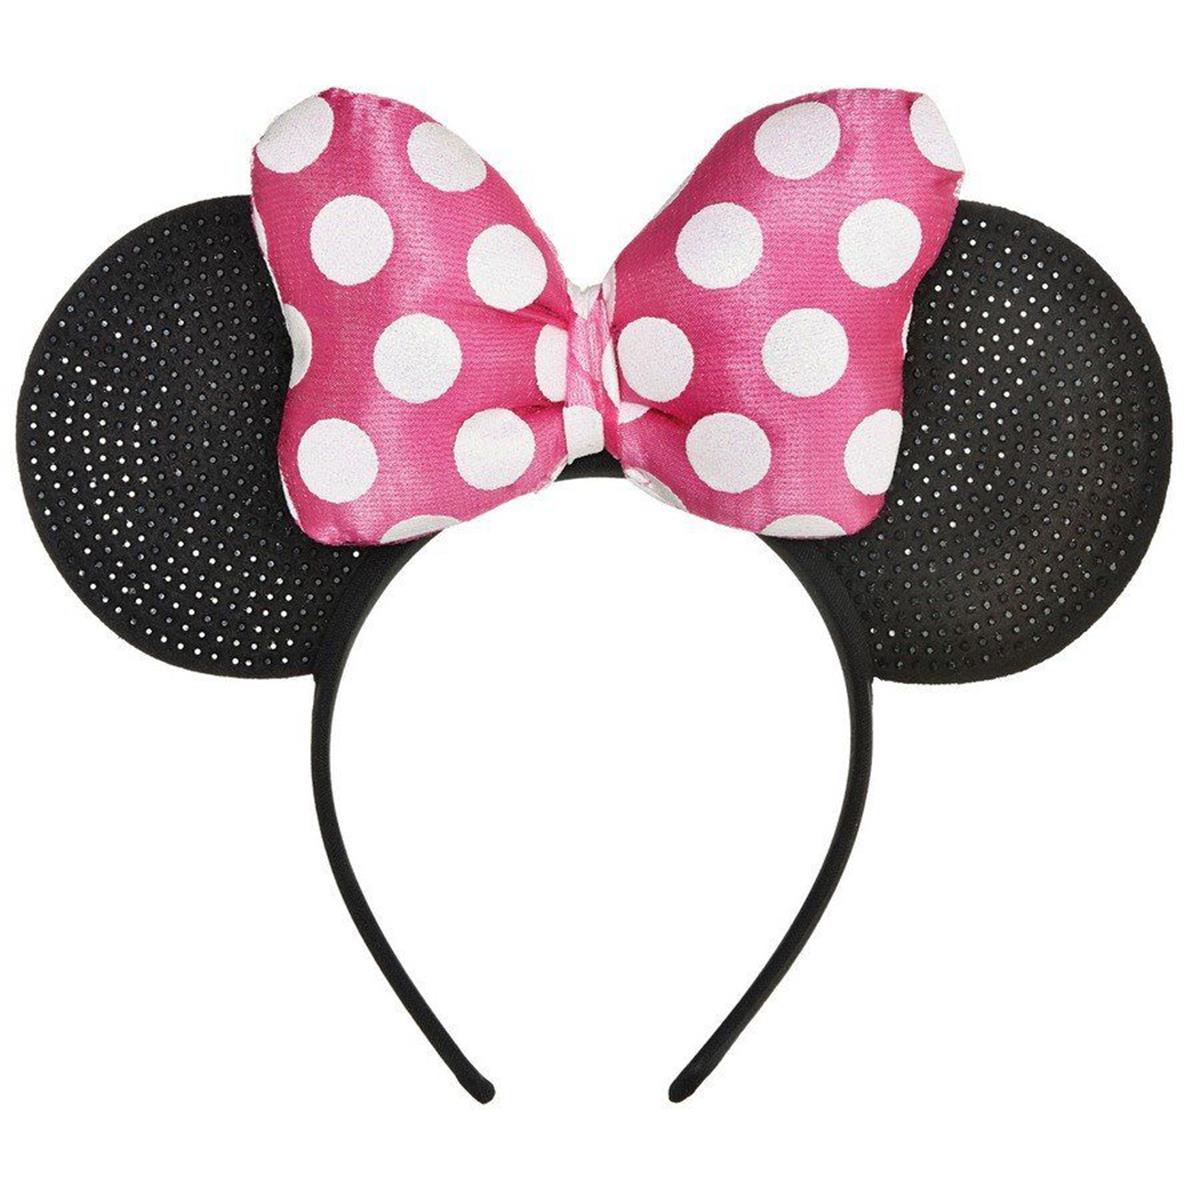 Picture of Amscan 639461 Minnie Mouse Forever Deluxe Headband